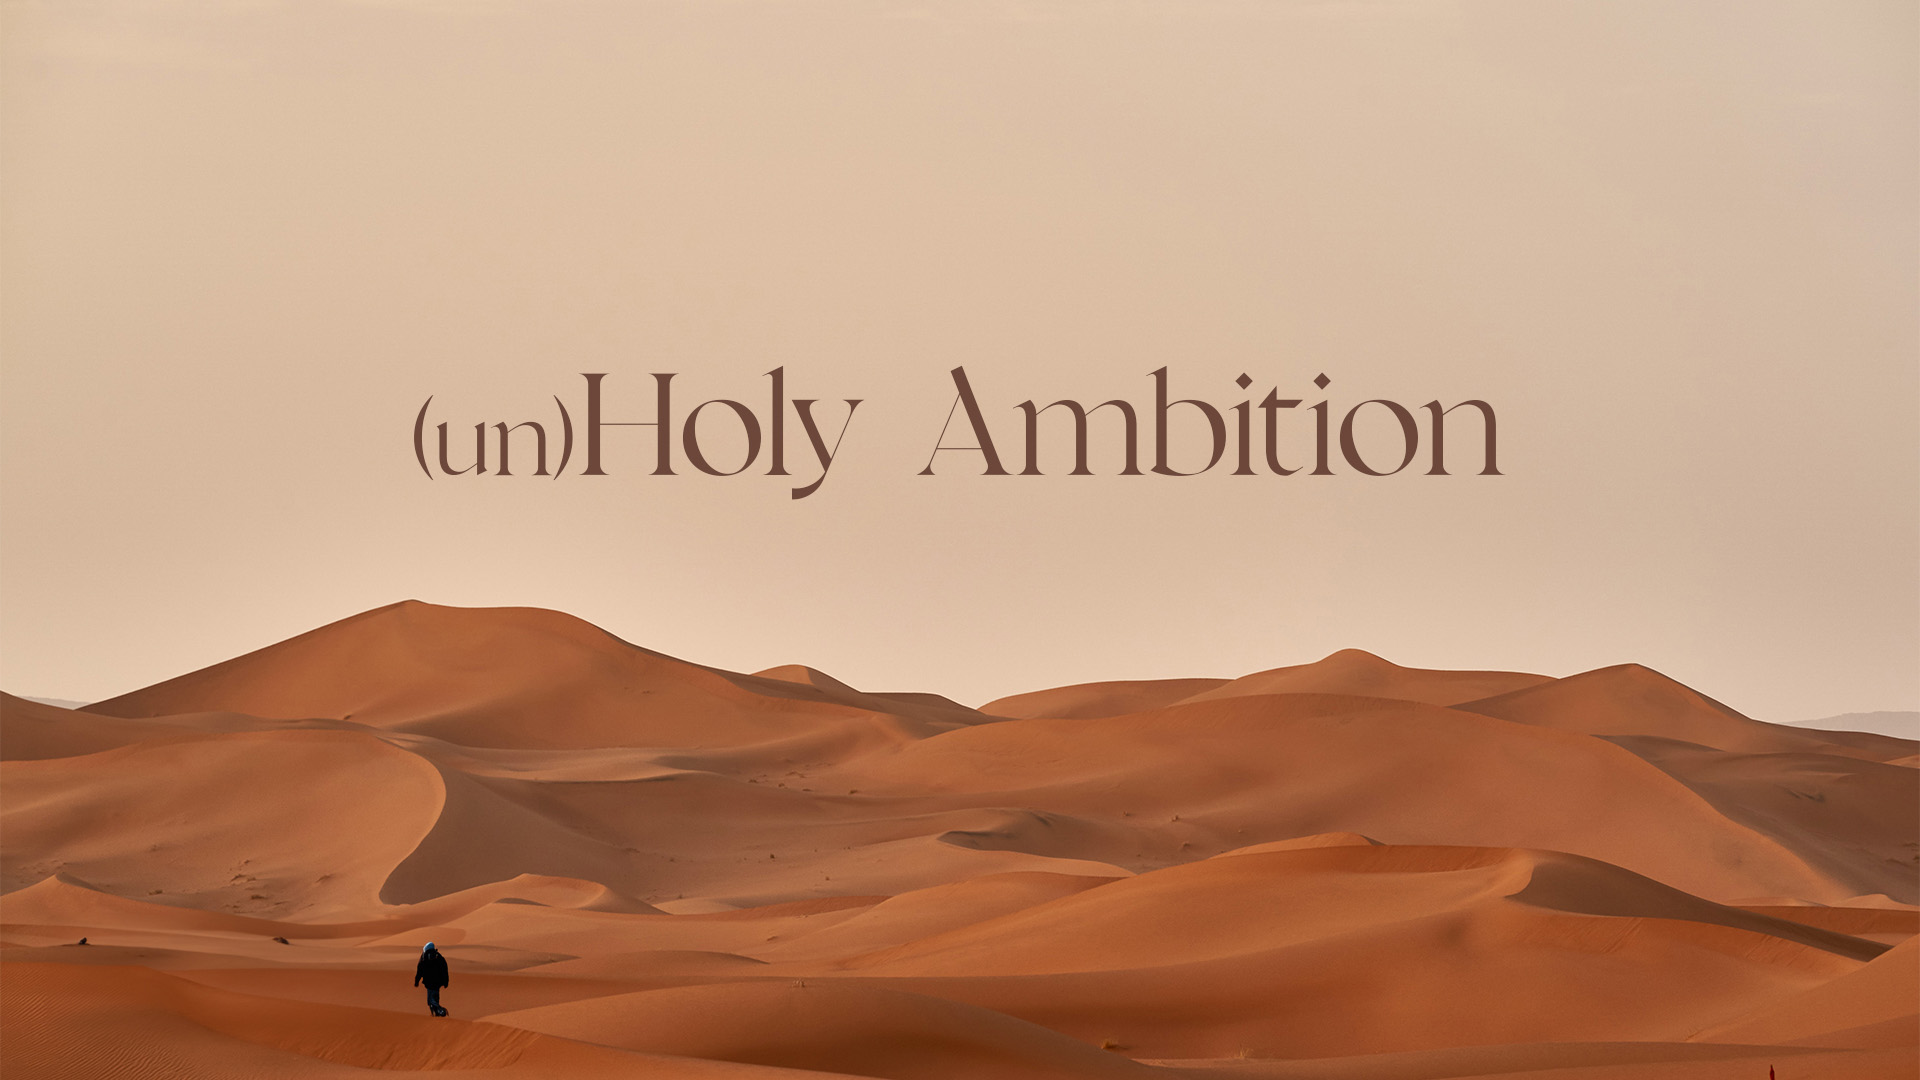 Series: (un)Holy Ambition